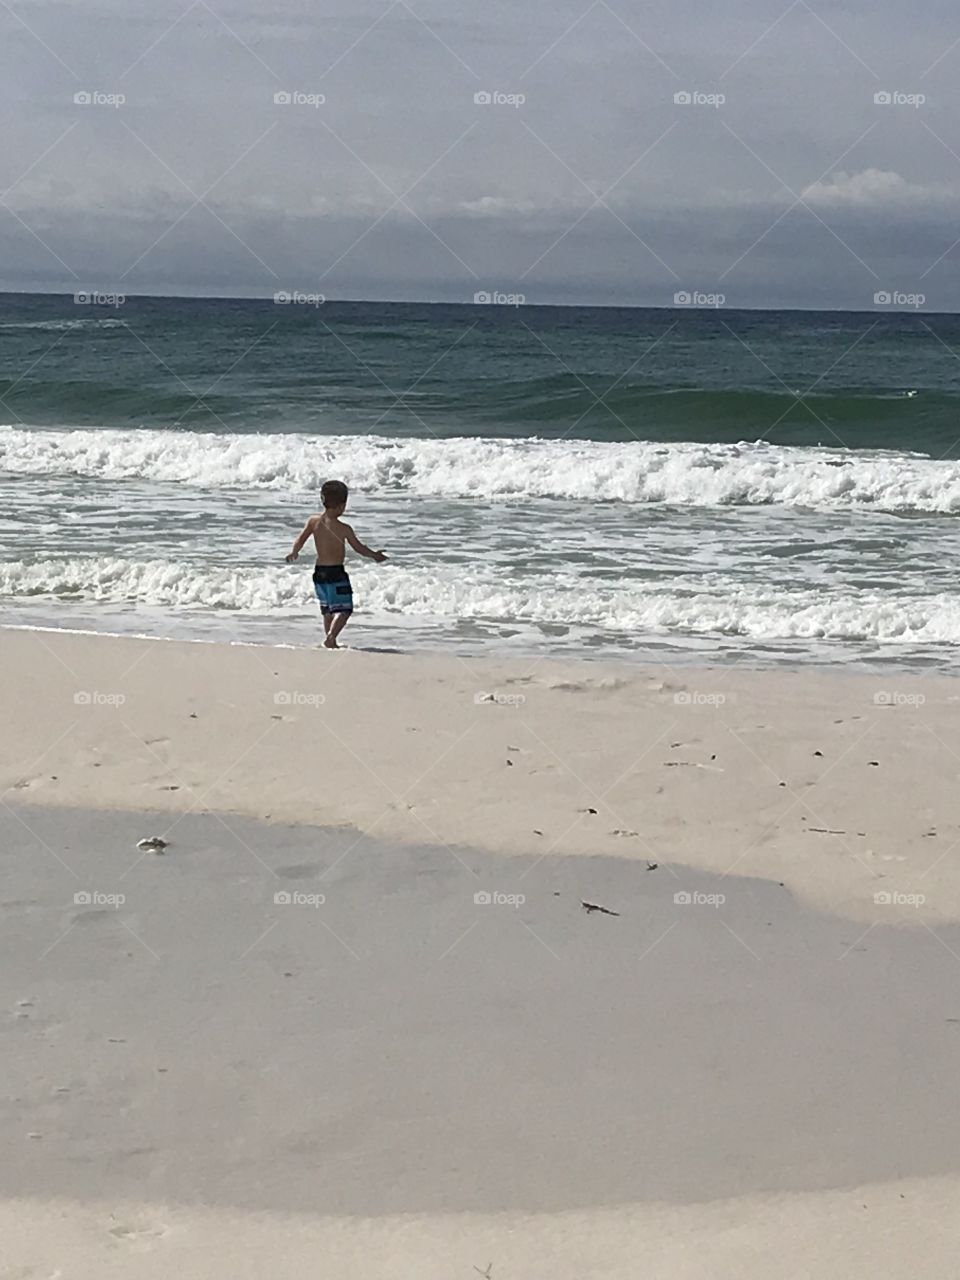 Playing in the ocean